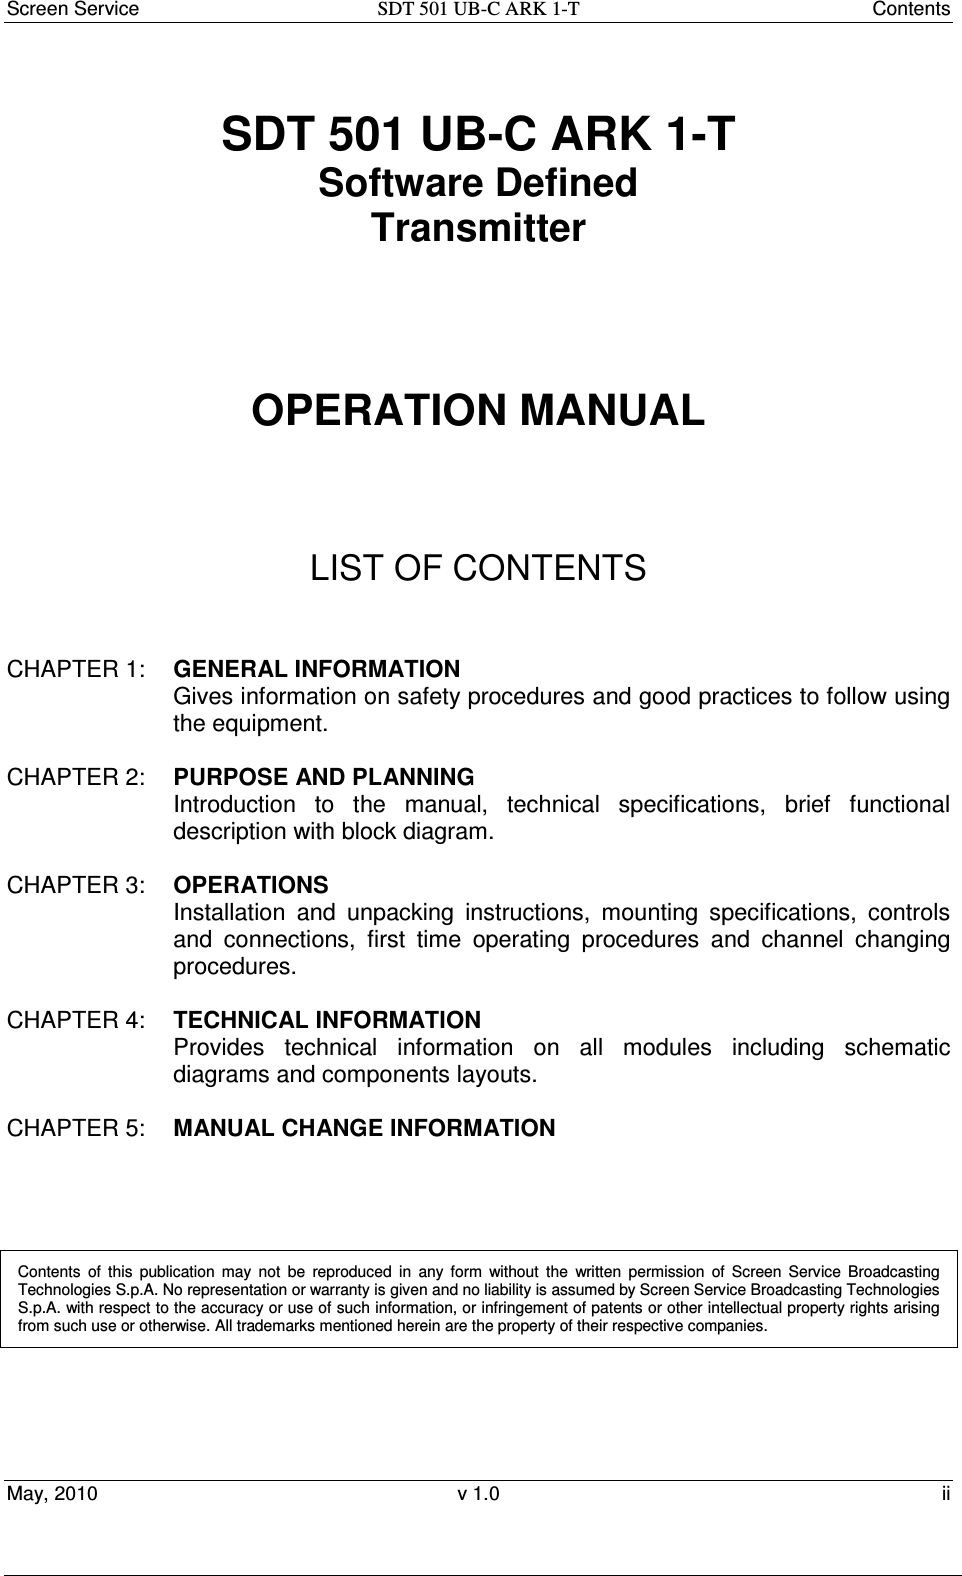 Screen Service  SDT 501 UB-C ARK 1-T  Contents May, 2010  v 1.0  ii  SDT 501 UB-C ARK 1-T Software Defined Transmitter         OPERATION MANUAL      LIST OF CONTENTS   CHAPTER 1:  GENERAL INFORMATION Gives information on safety procedures and good practices to follow using the equipment.  CHAPTER 2:  PURPOSE AND PLANNING Introduction  to  the  manual,  technical  specifications,  brief  functional description with block diagram.  CHAPTER 3:  OPERATIONS Installation  and  unpacking  instructions,  mounting  specifications,  controls and  connections,  first  time  operating  procedures  and  channel  changing procedures.  CHAPTER 4:  TECHNICAL INFORMATION Provides  technical  information  on  all  modules  including  schematic diagrams and components layouts.  CHAPTER 5:   MANUAL CHANGE INFORMATION      Contents  of  this  publication  may  not  be  reproduced  in  any  form  without  the  written  permission  of  Screen  Service  Broadcasting Technologies S.p.A. No representation or warranty is given and no liability is assumed by Screen Service Broadcasting Technologies S.p.A. with respect to the accuracy or use of such information, or infringement of patents or other intellectual property rights arising from such use or otherwise. All trademarks mentioned herein are the property of their respective companies.  